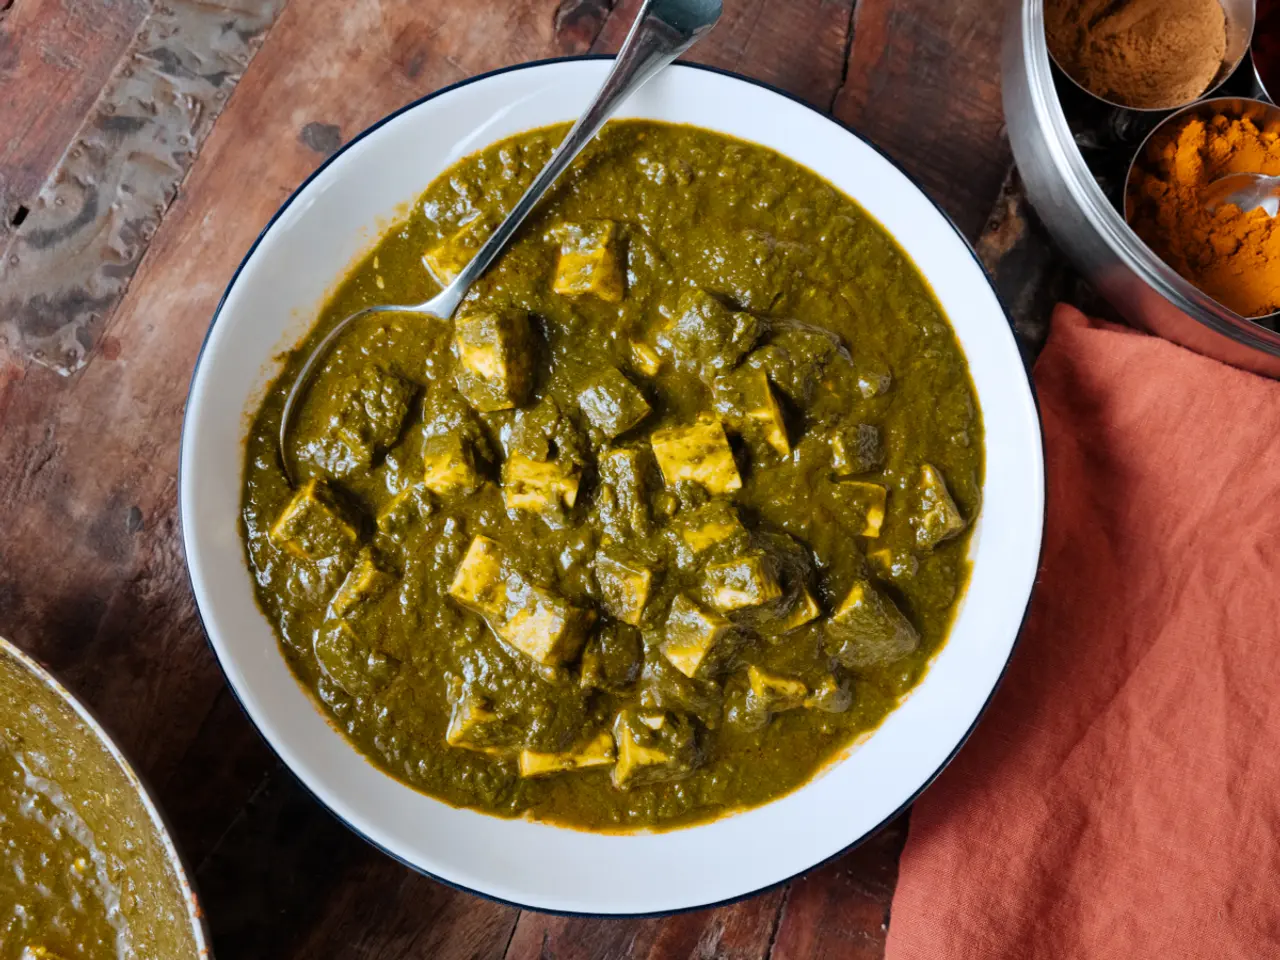 A bowl of palak paneer, an Indian dish made with paneer cheese and a thick spinach sauce, is presented on a wooden table with spices nearby.